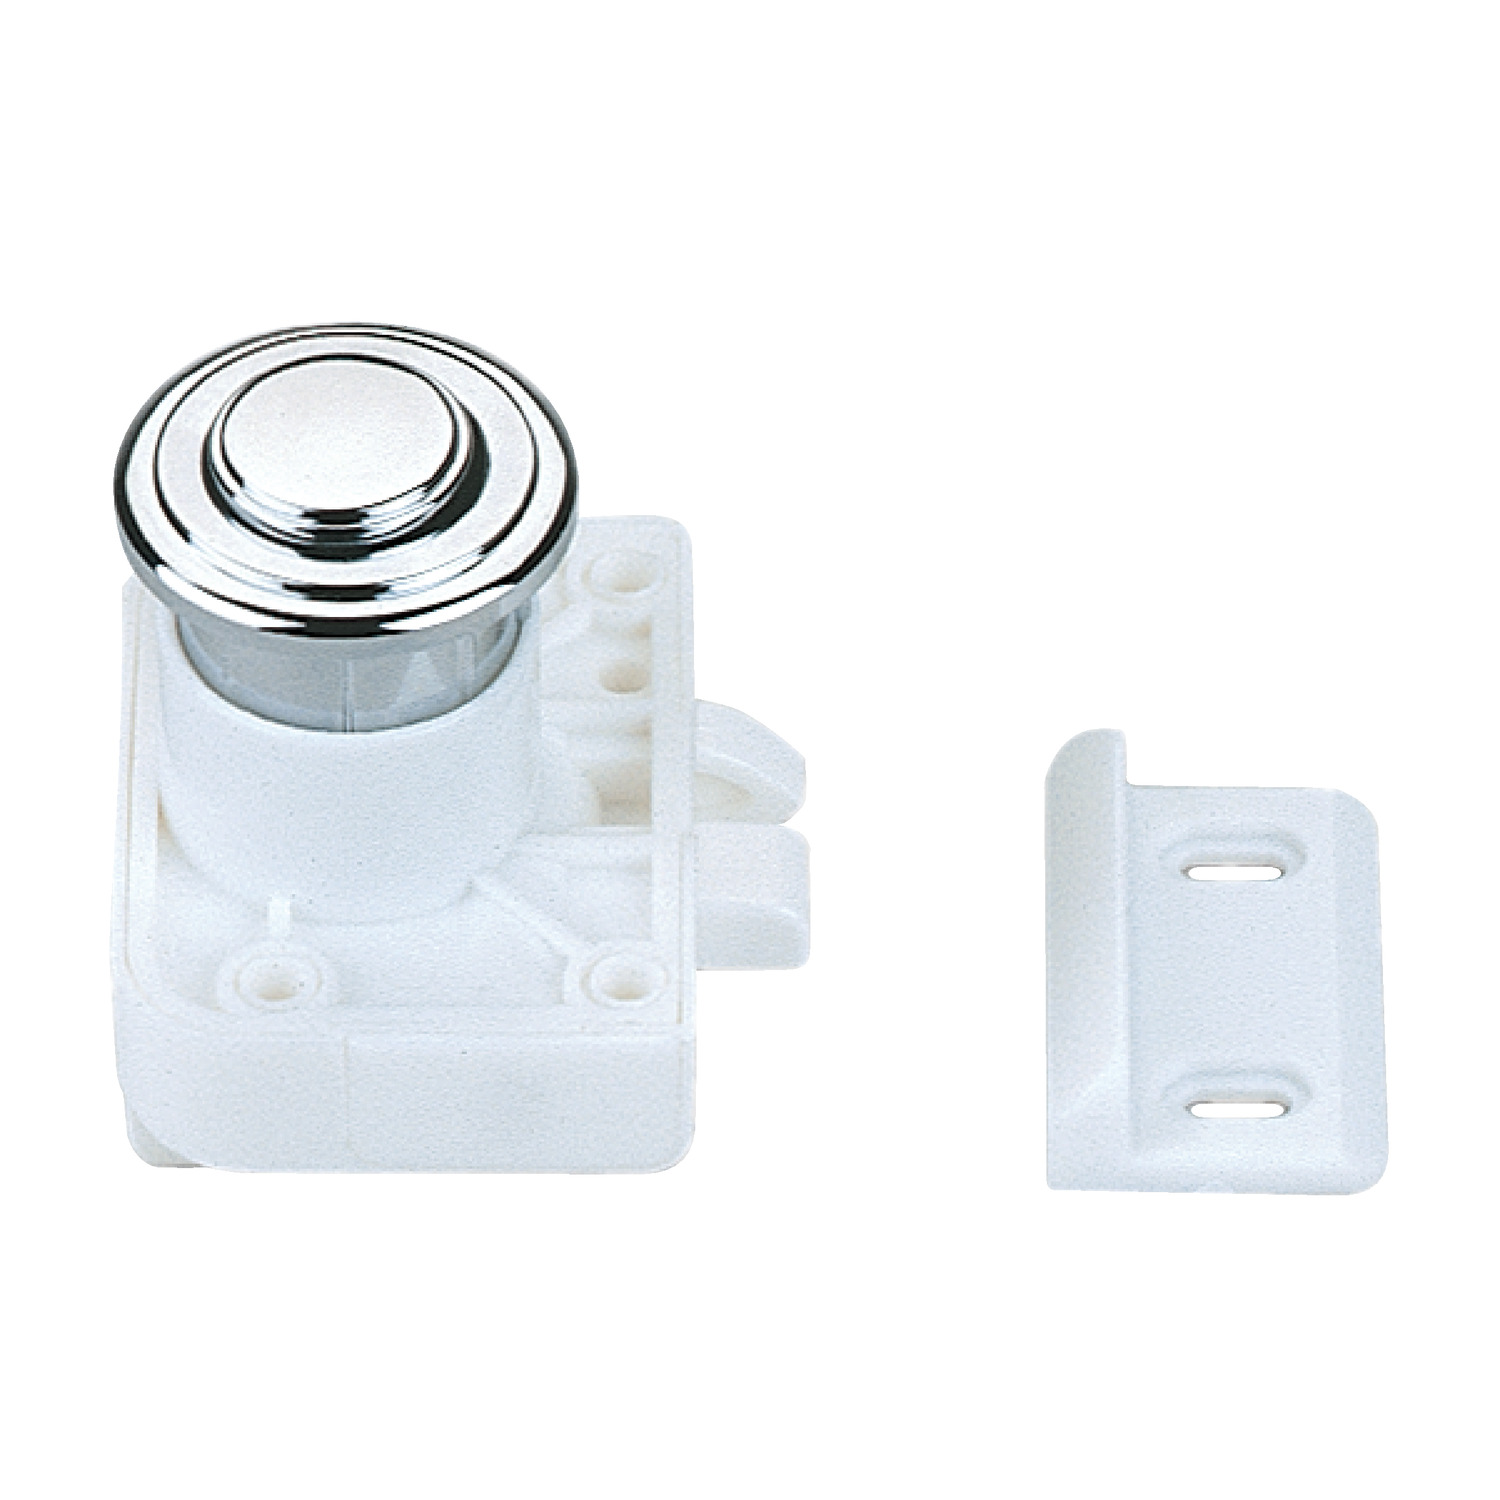 E1400.AC0070 Push Knobs Satin brass finish - with latch - for overlay doors